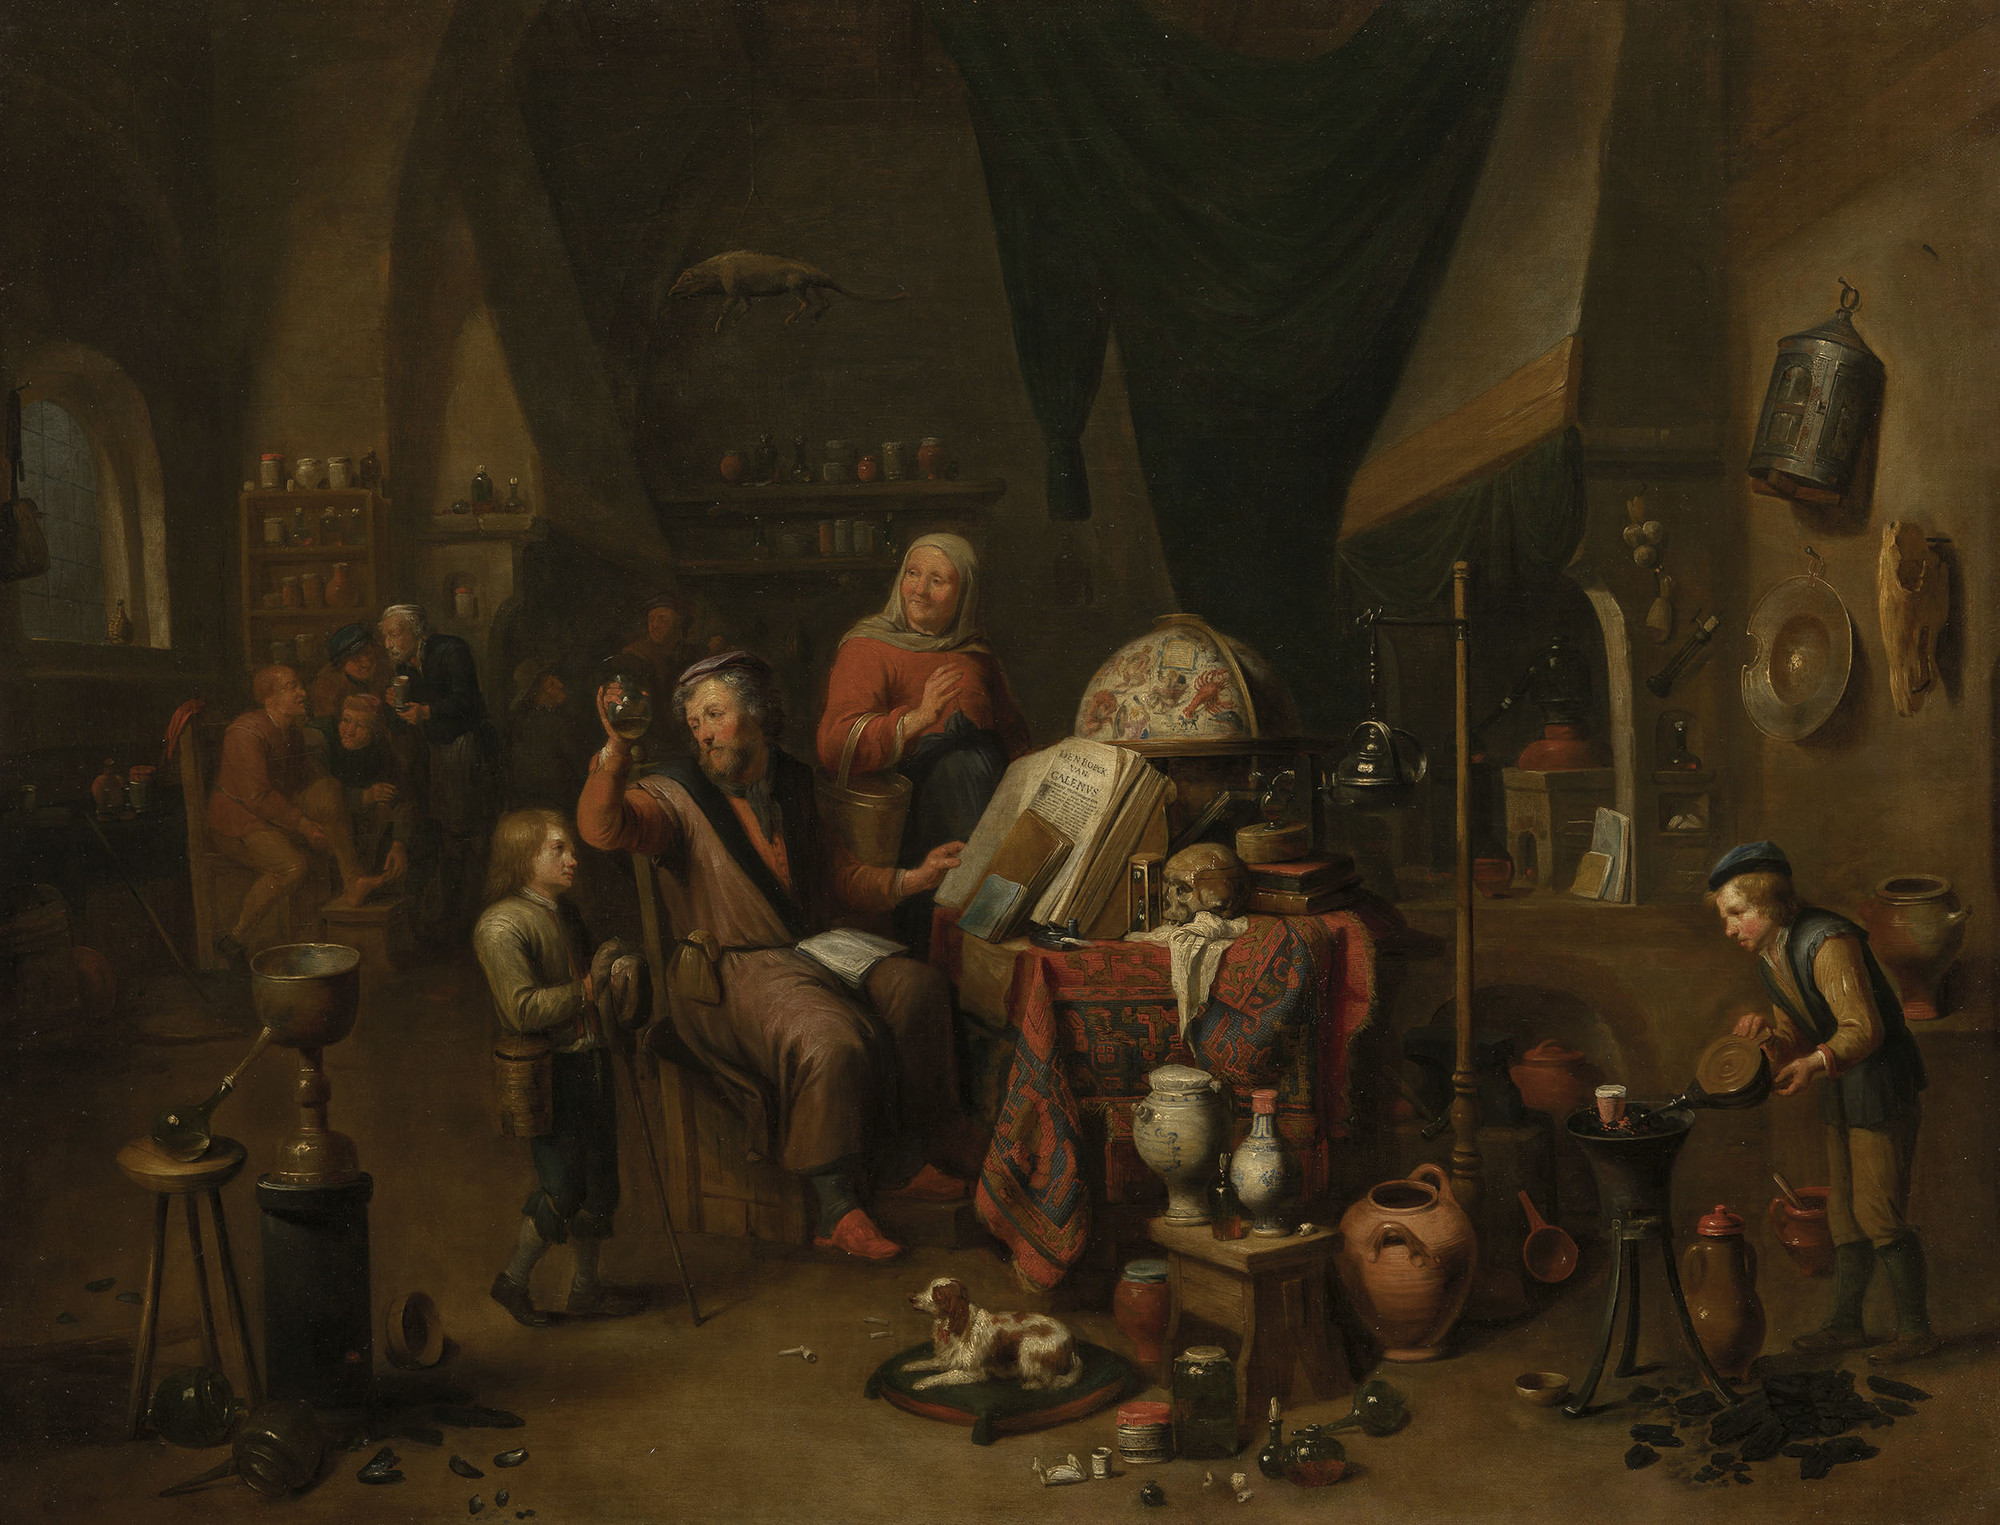 This is one of a pair of paintings (see CWLF 127, 406900) depicting a collector surrounded by his possessions and an physician in his laboratory. Both works consciously perpetuate the tradition of David Teniers, who specialised in alchemists and collector